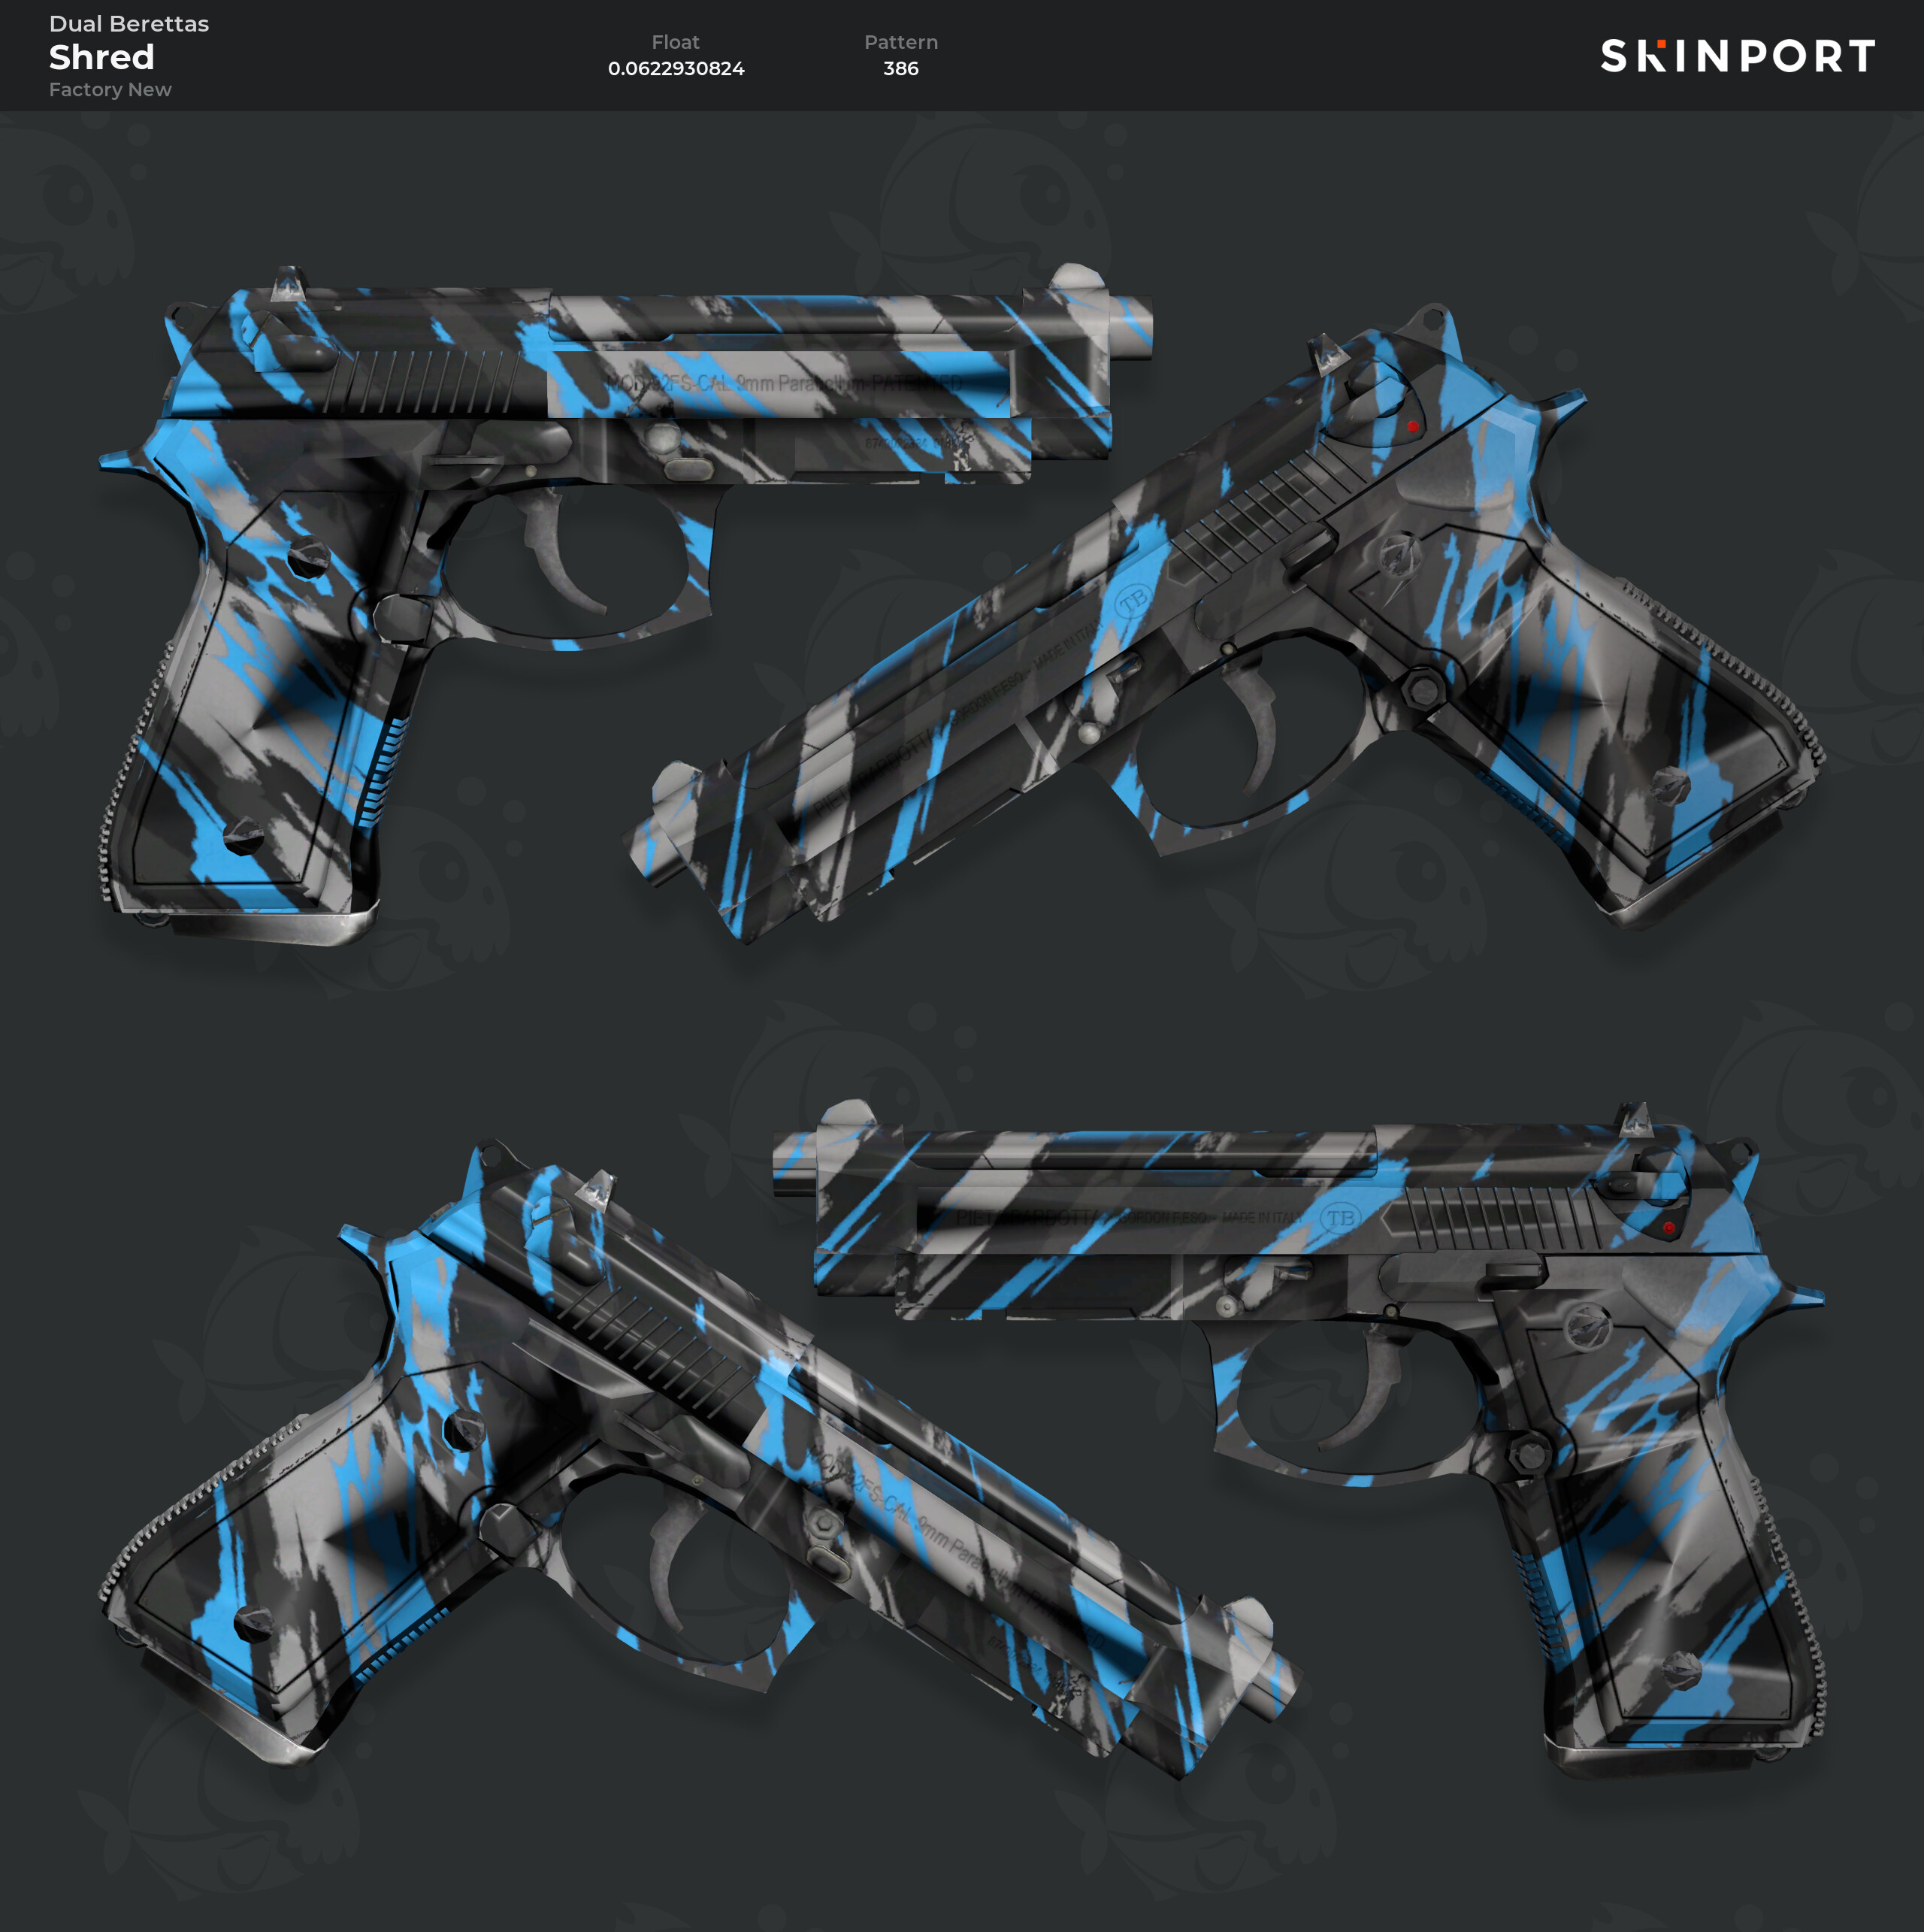 instal the new version for windows Dual Berettas Stained cs go skin